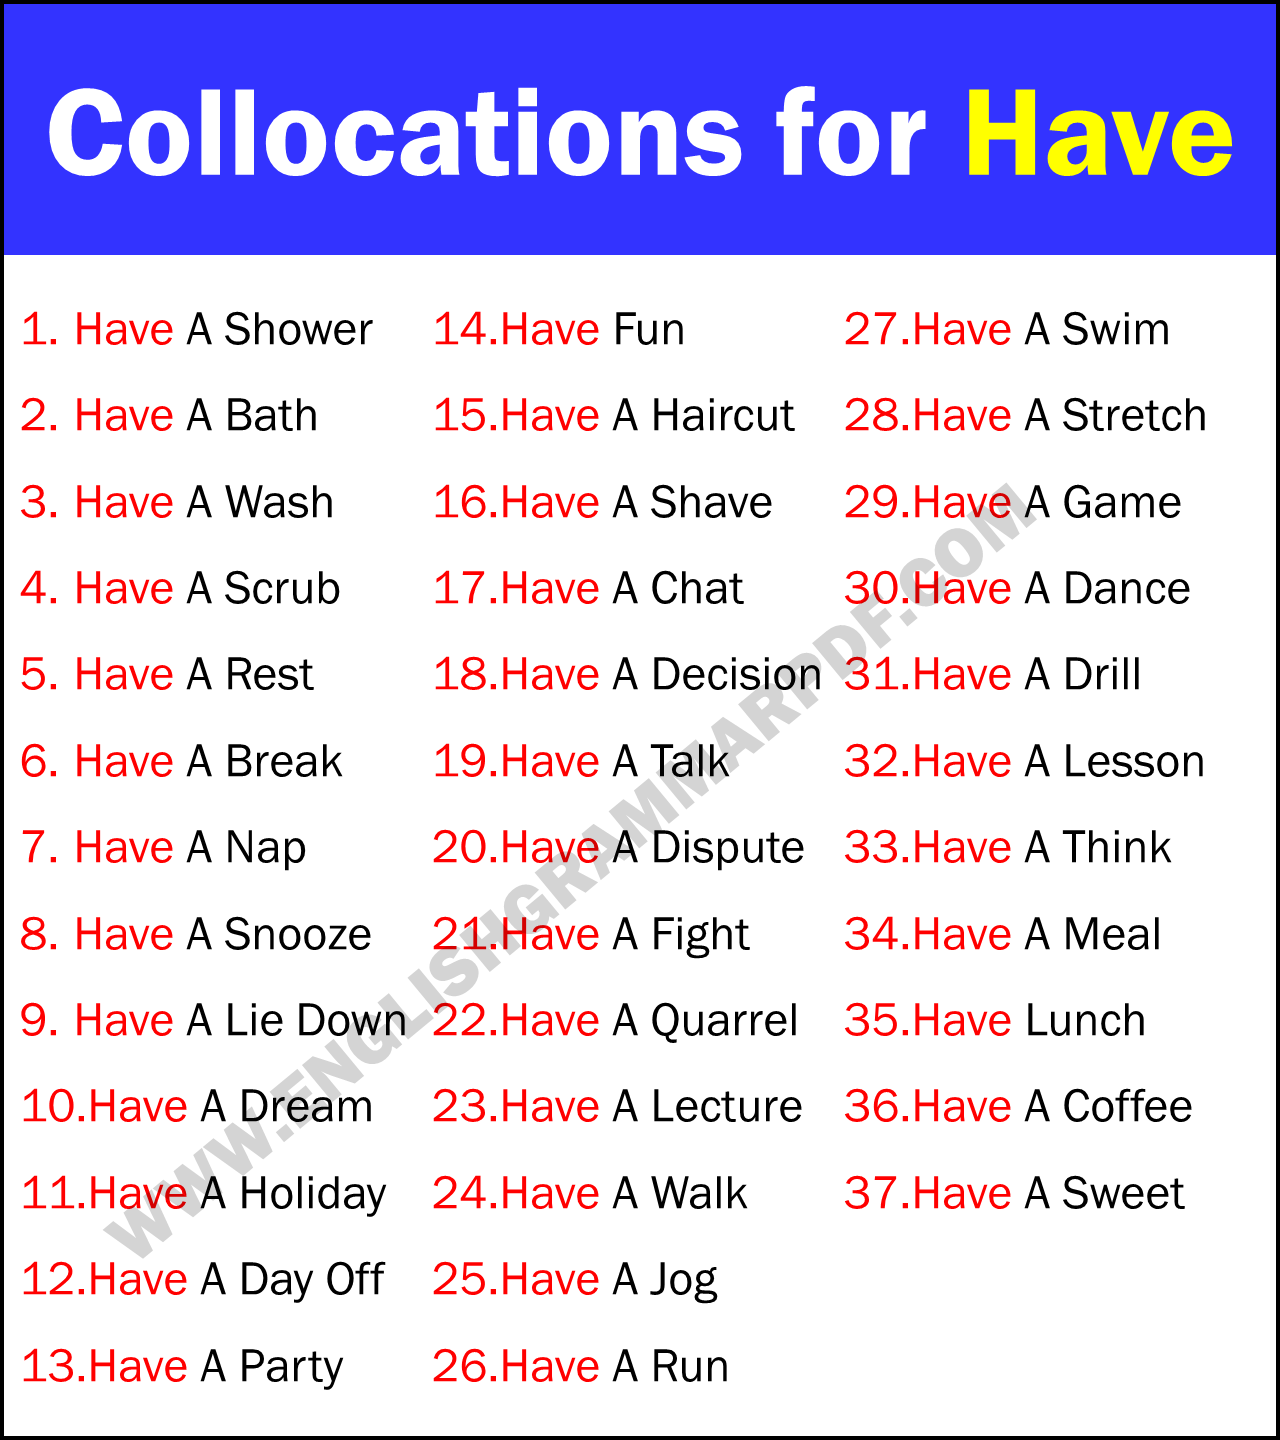 Collocations for Have